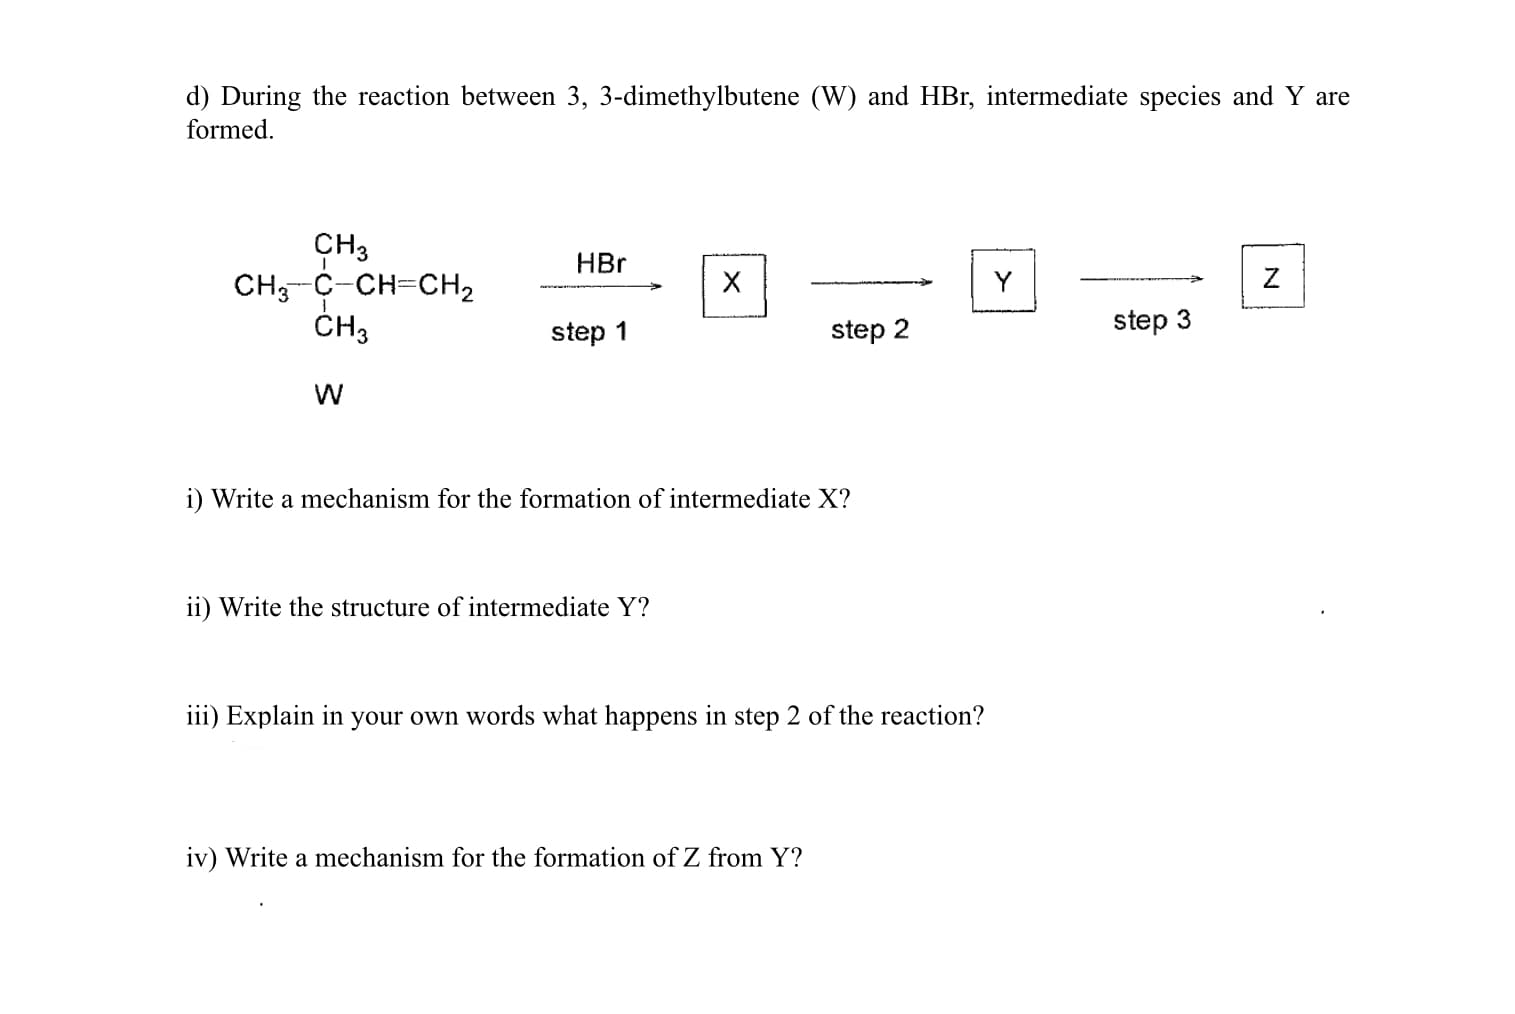 d) During the reaction between 3, 3-dimethylbutene (W) and HBr, intermediate species and Y are
formed.
CH3
CH;-C-CH=CH2
ČH3
HBr
Y
step 1
step 2
step 3
i) Write a mechanism for the formation of intermediate X?
ii) Write the structure of intermediate Y?
iii) Explain in your own words what happens in step 2 of the reaction?
iv) Write a mechanism for the formation of Z from Y?
